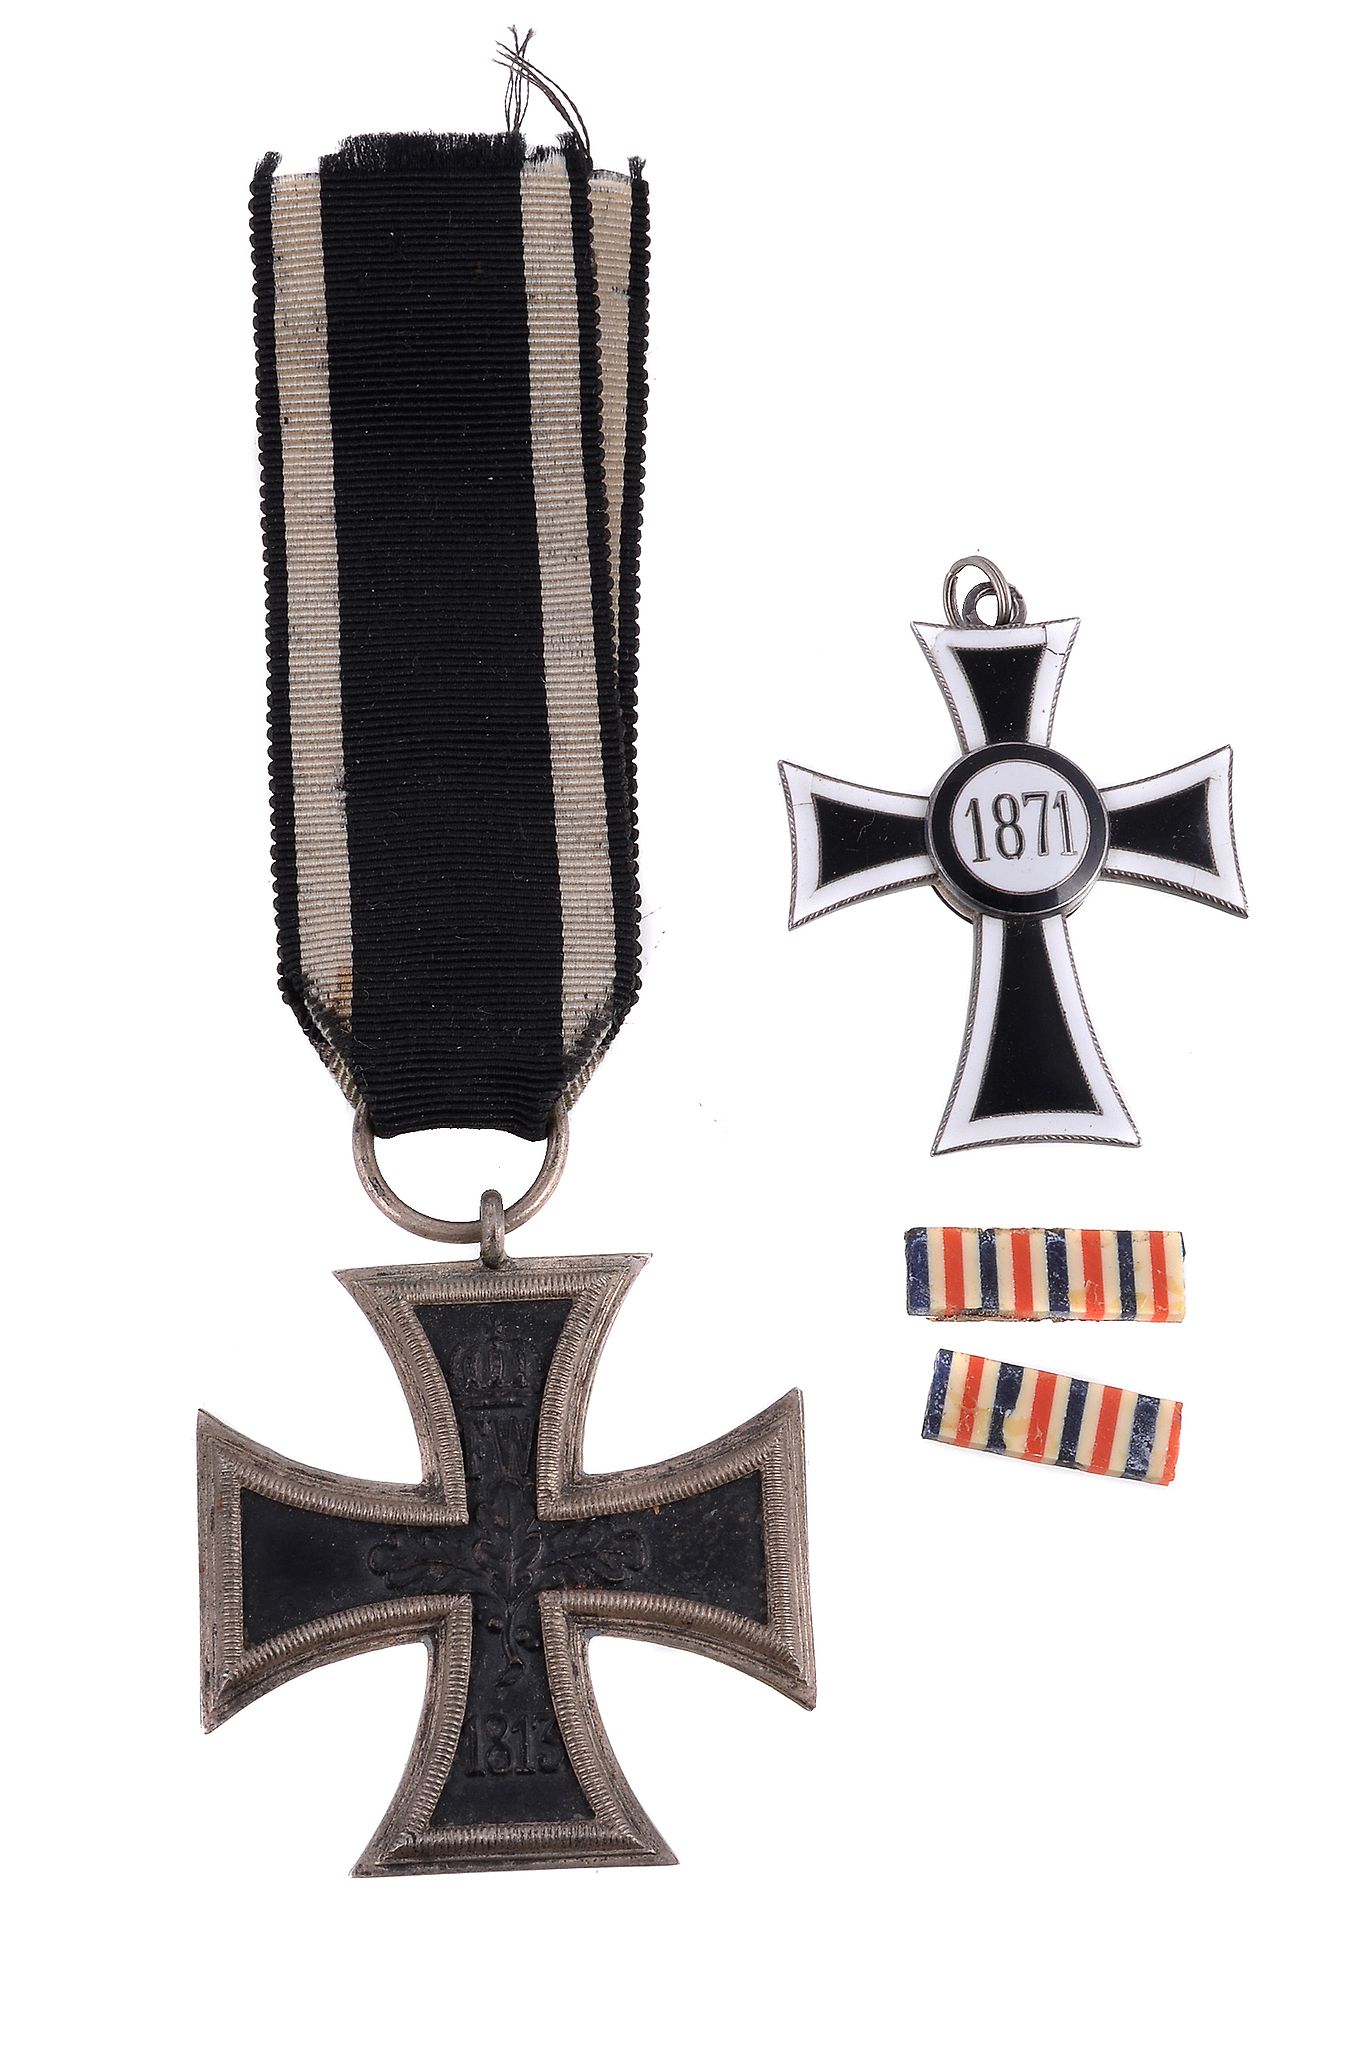 Austria, Empire, Teutonic Order, Marianer Cross 1871, breast badge, silver and enamel, in case of